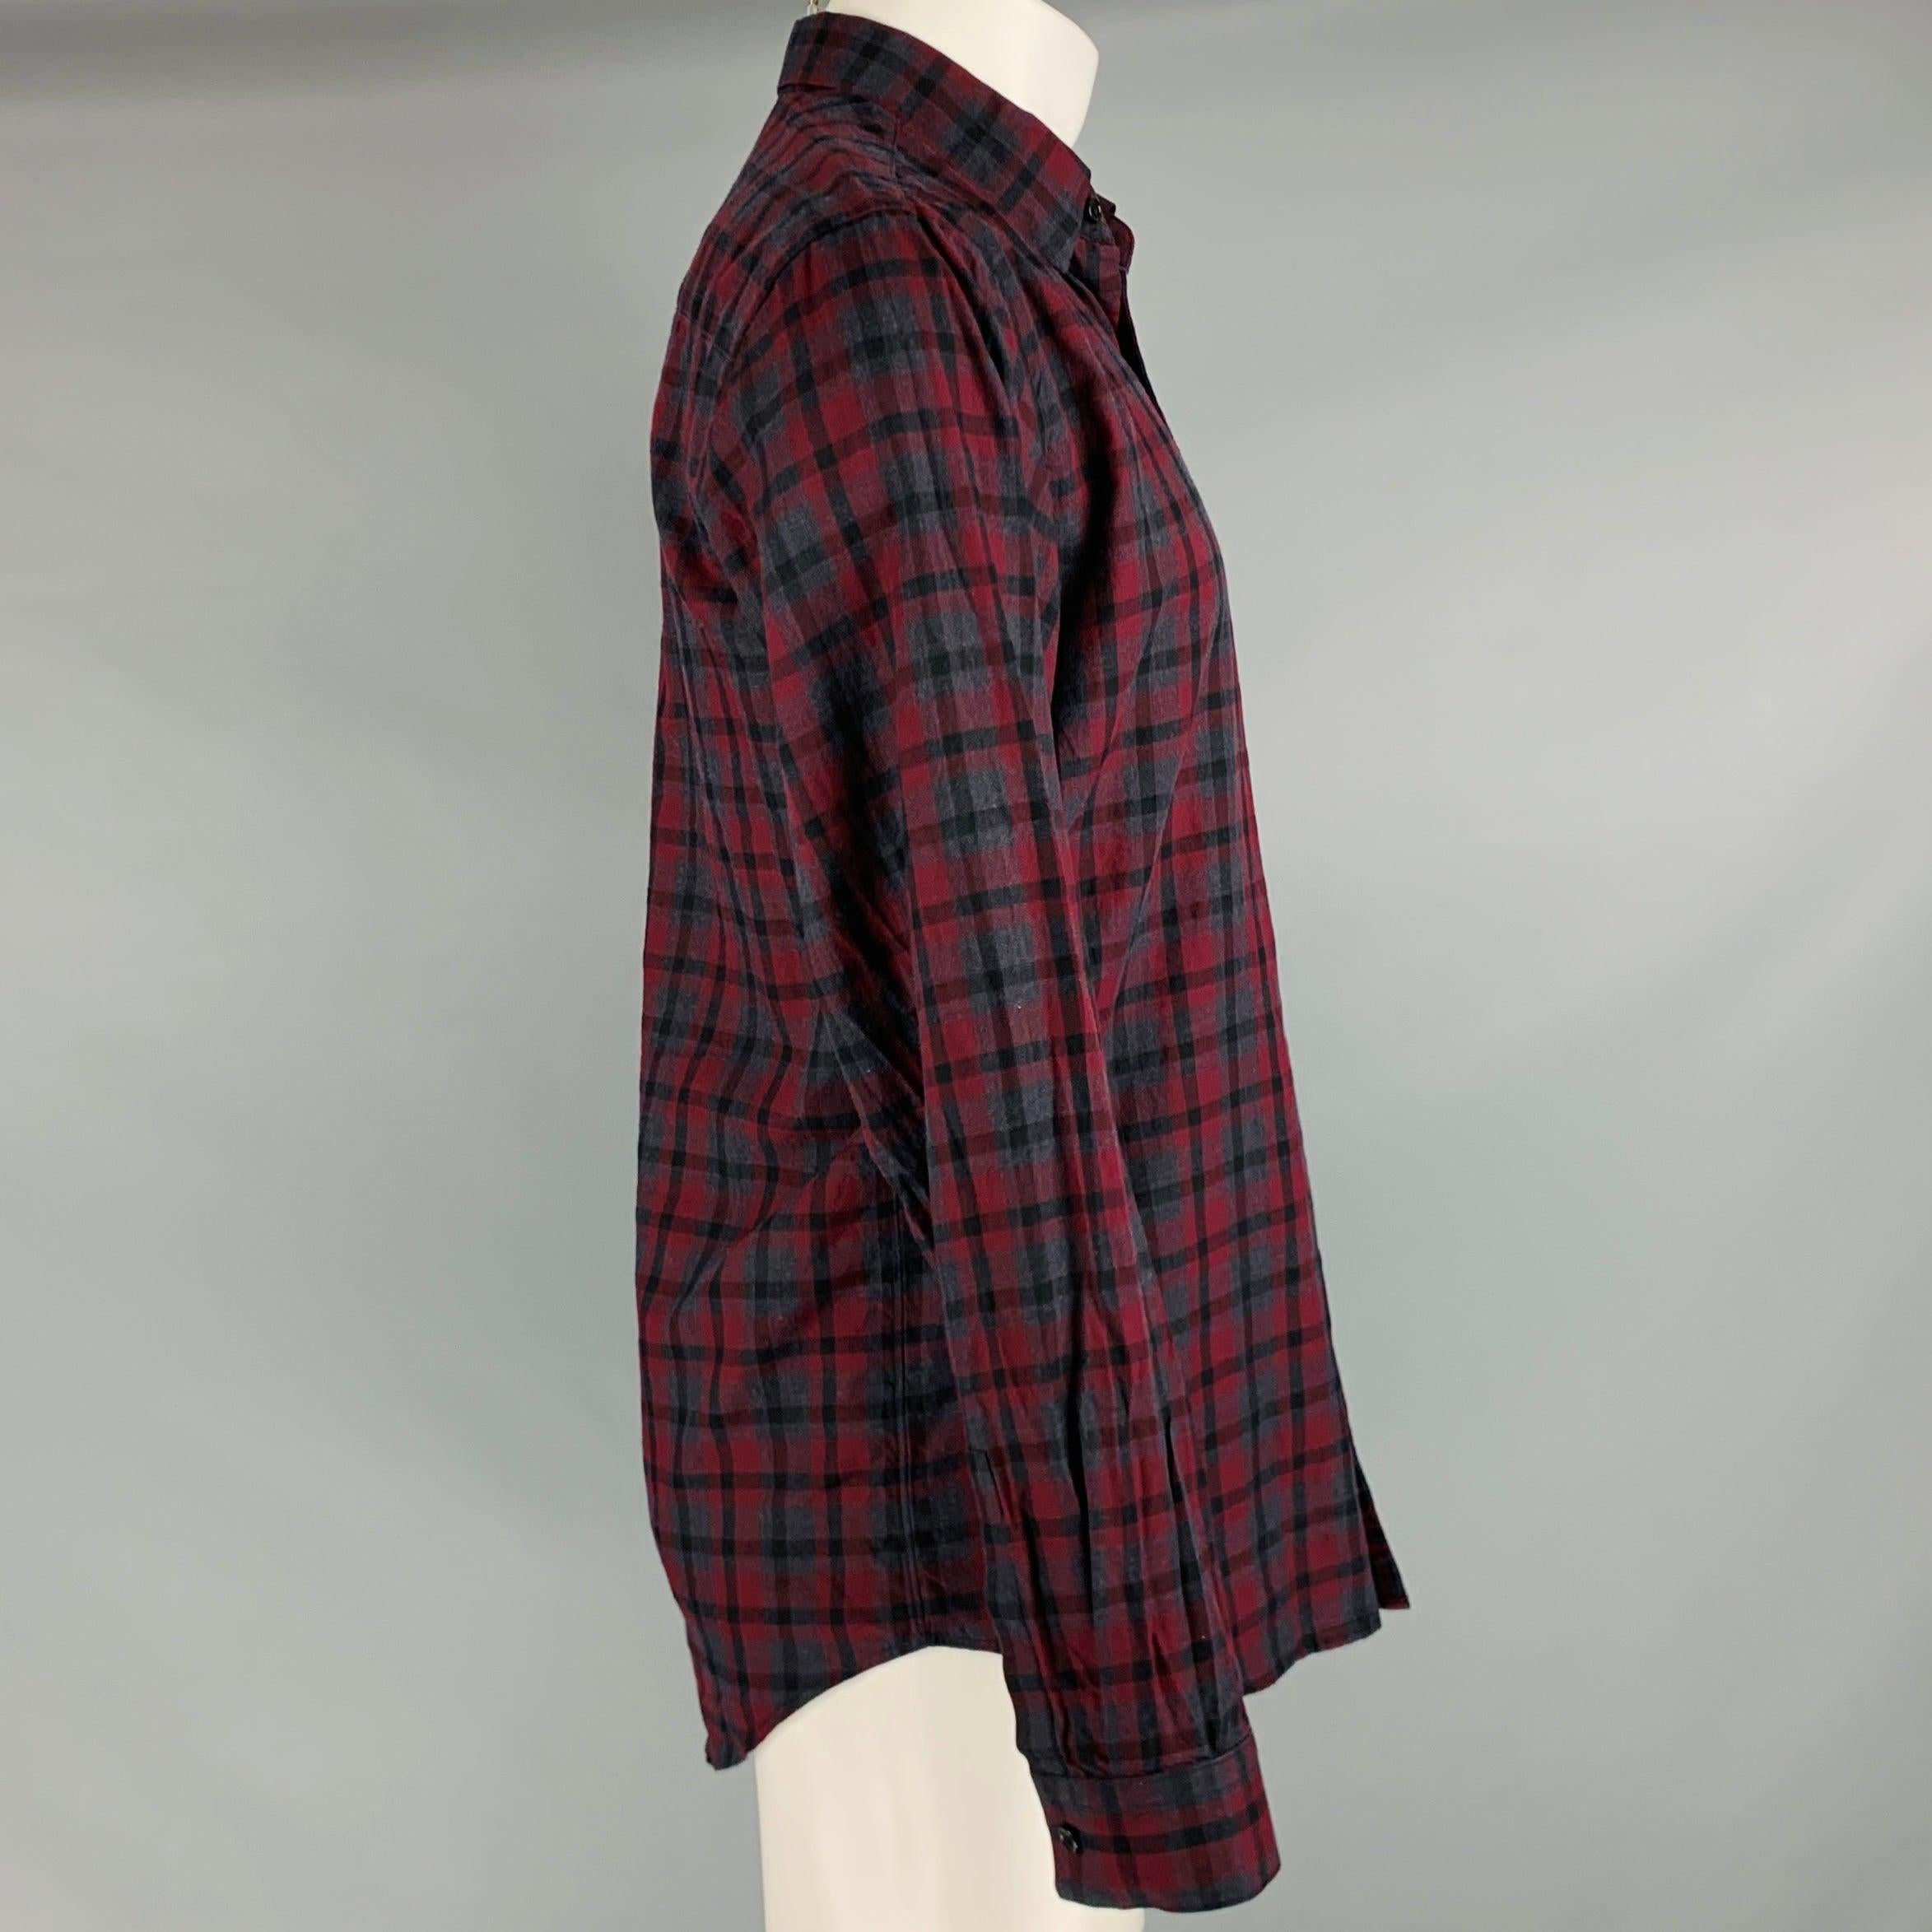 THEORY long sleeve shirt
in a burgundy and charcoal cotton fabric featuring a plaid pattern, spread collar, and button closure.Very Good Pre-Owned Condition. Chipped button. 

Marked:   M 

Measurements: 
 
Shoulder: 18.5 inches Chest: 44 inches